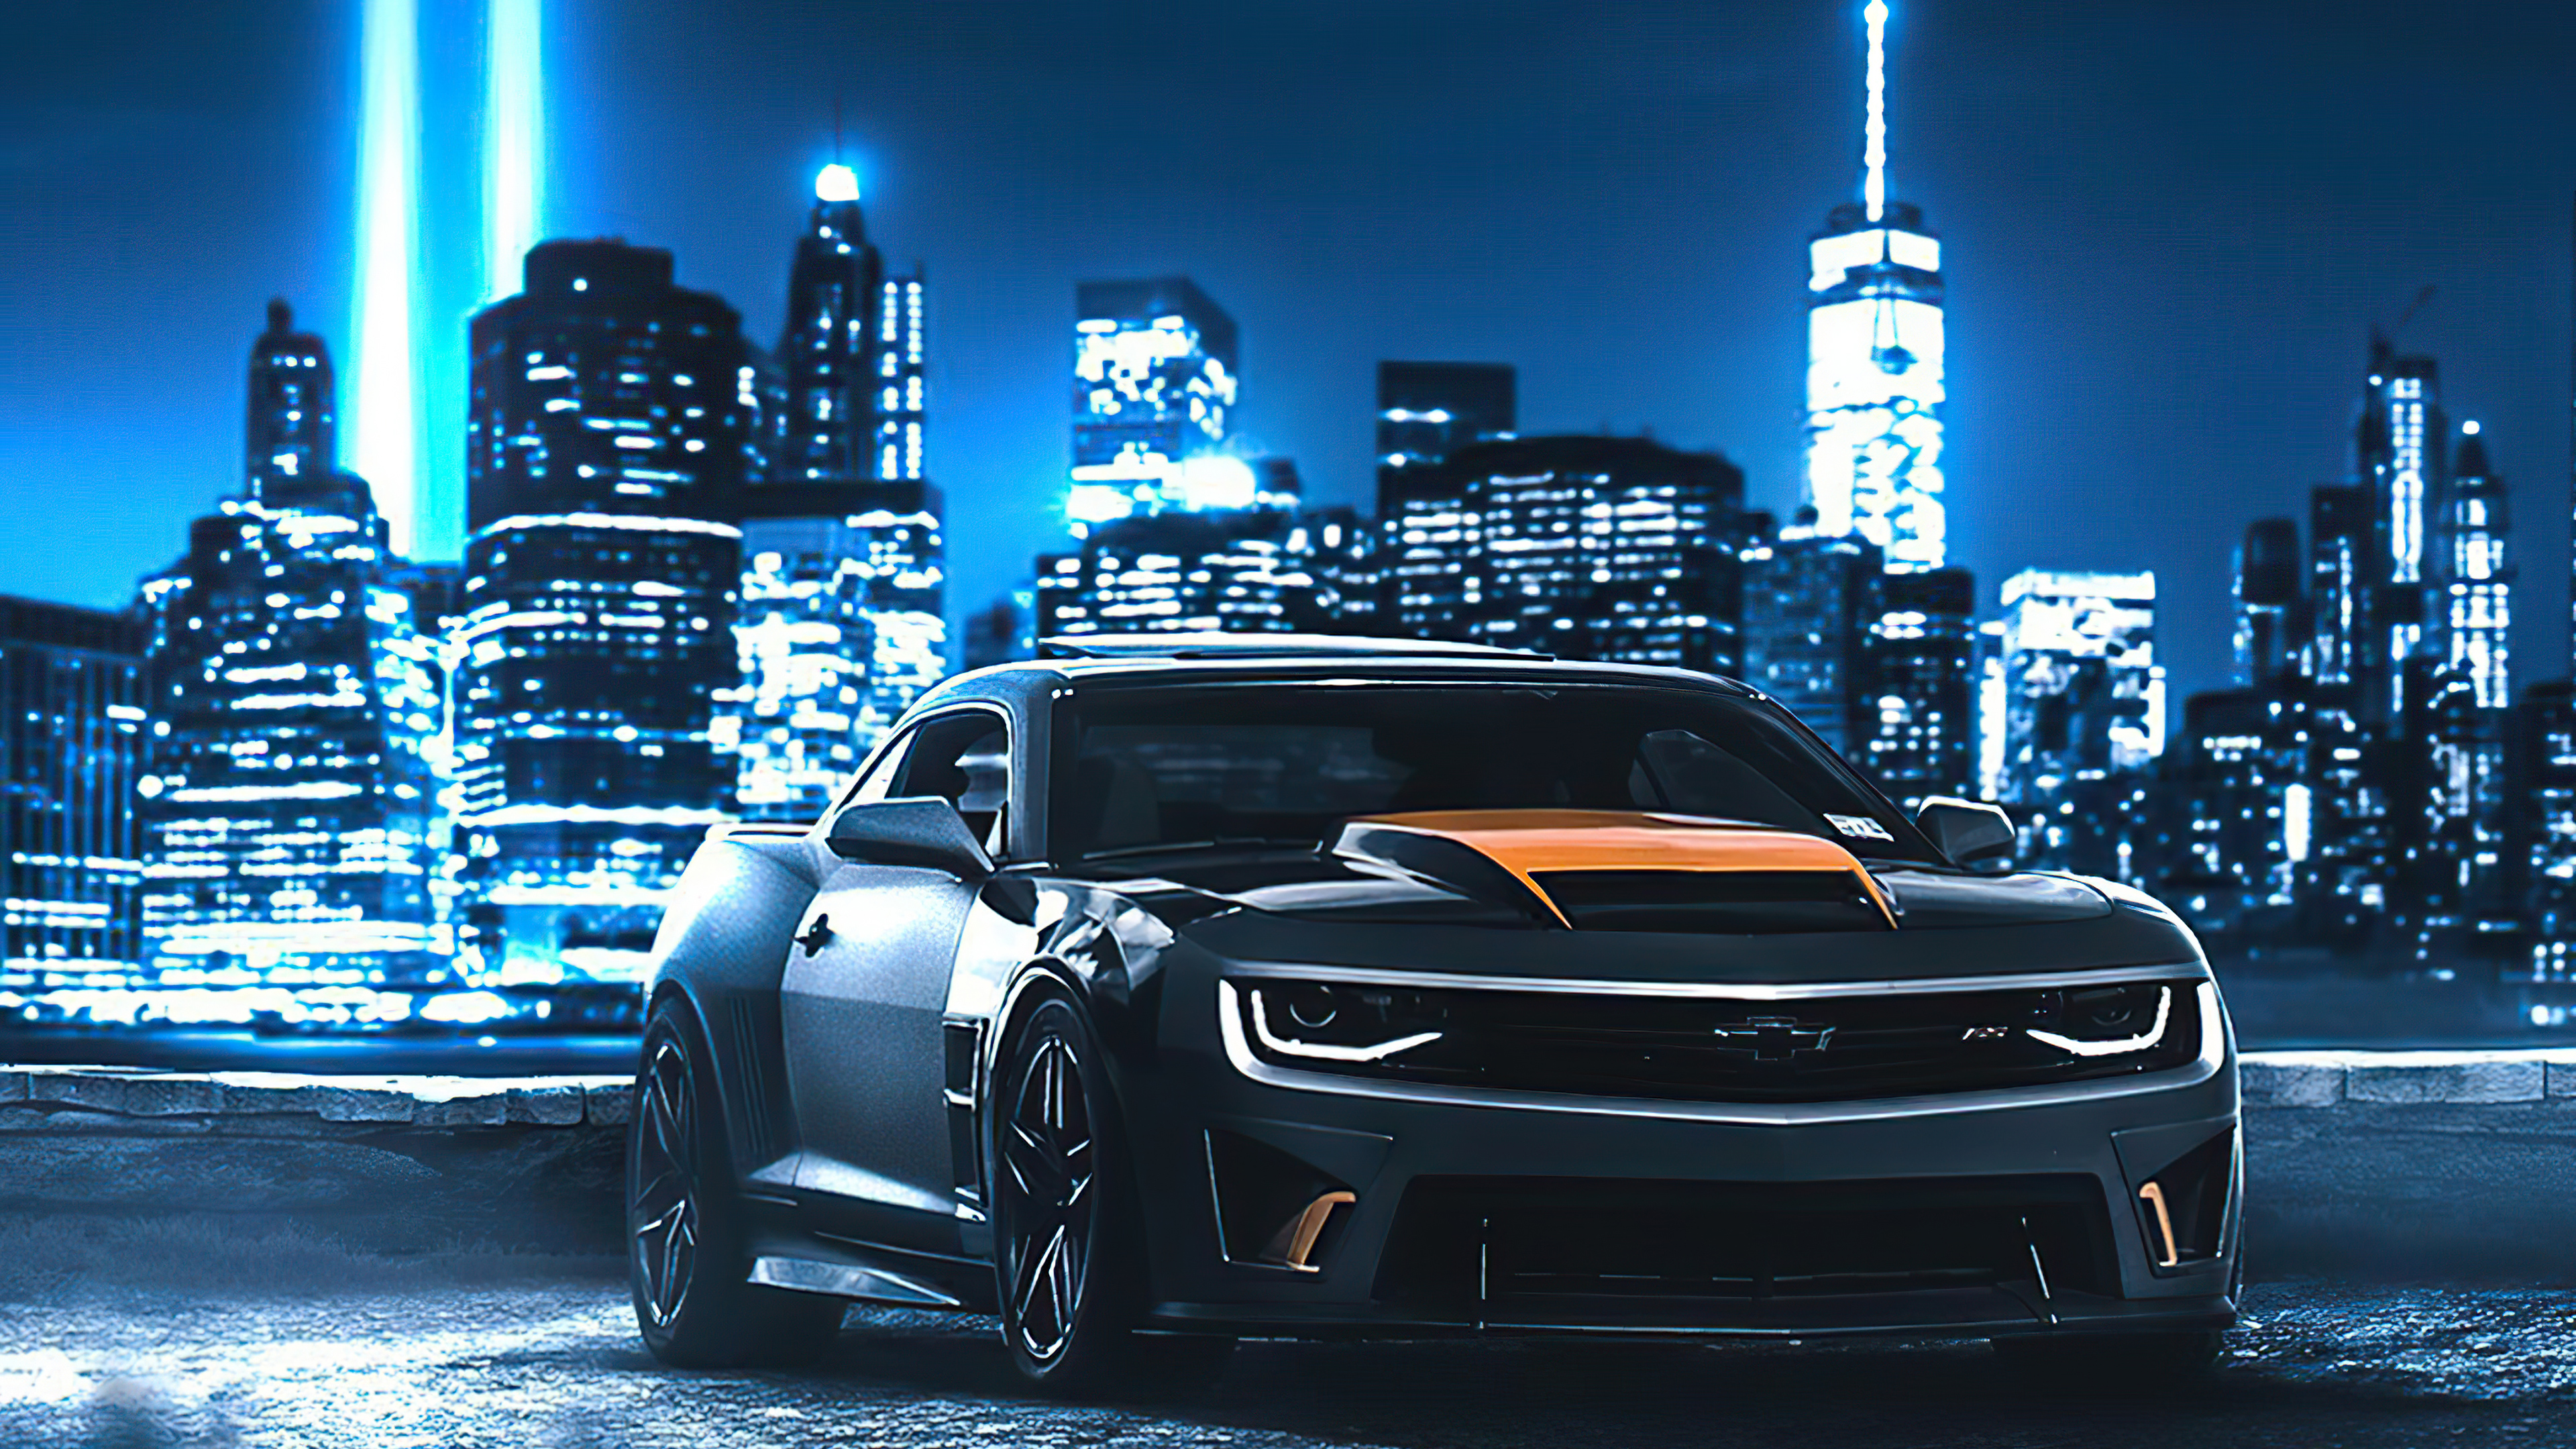 Download Get Ready to Feel the Rush with a Cool Camaro Wallpaper   Wallpaperscom